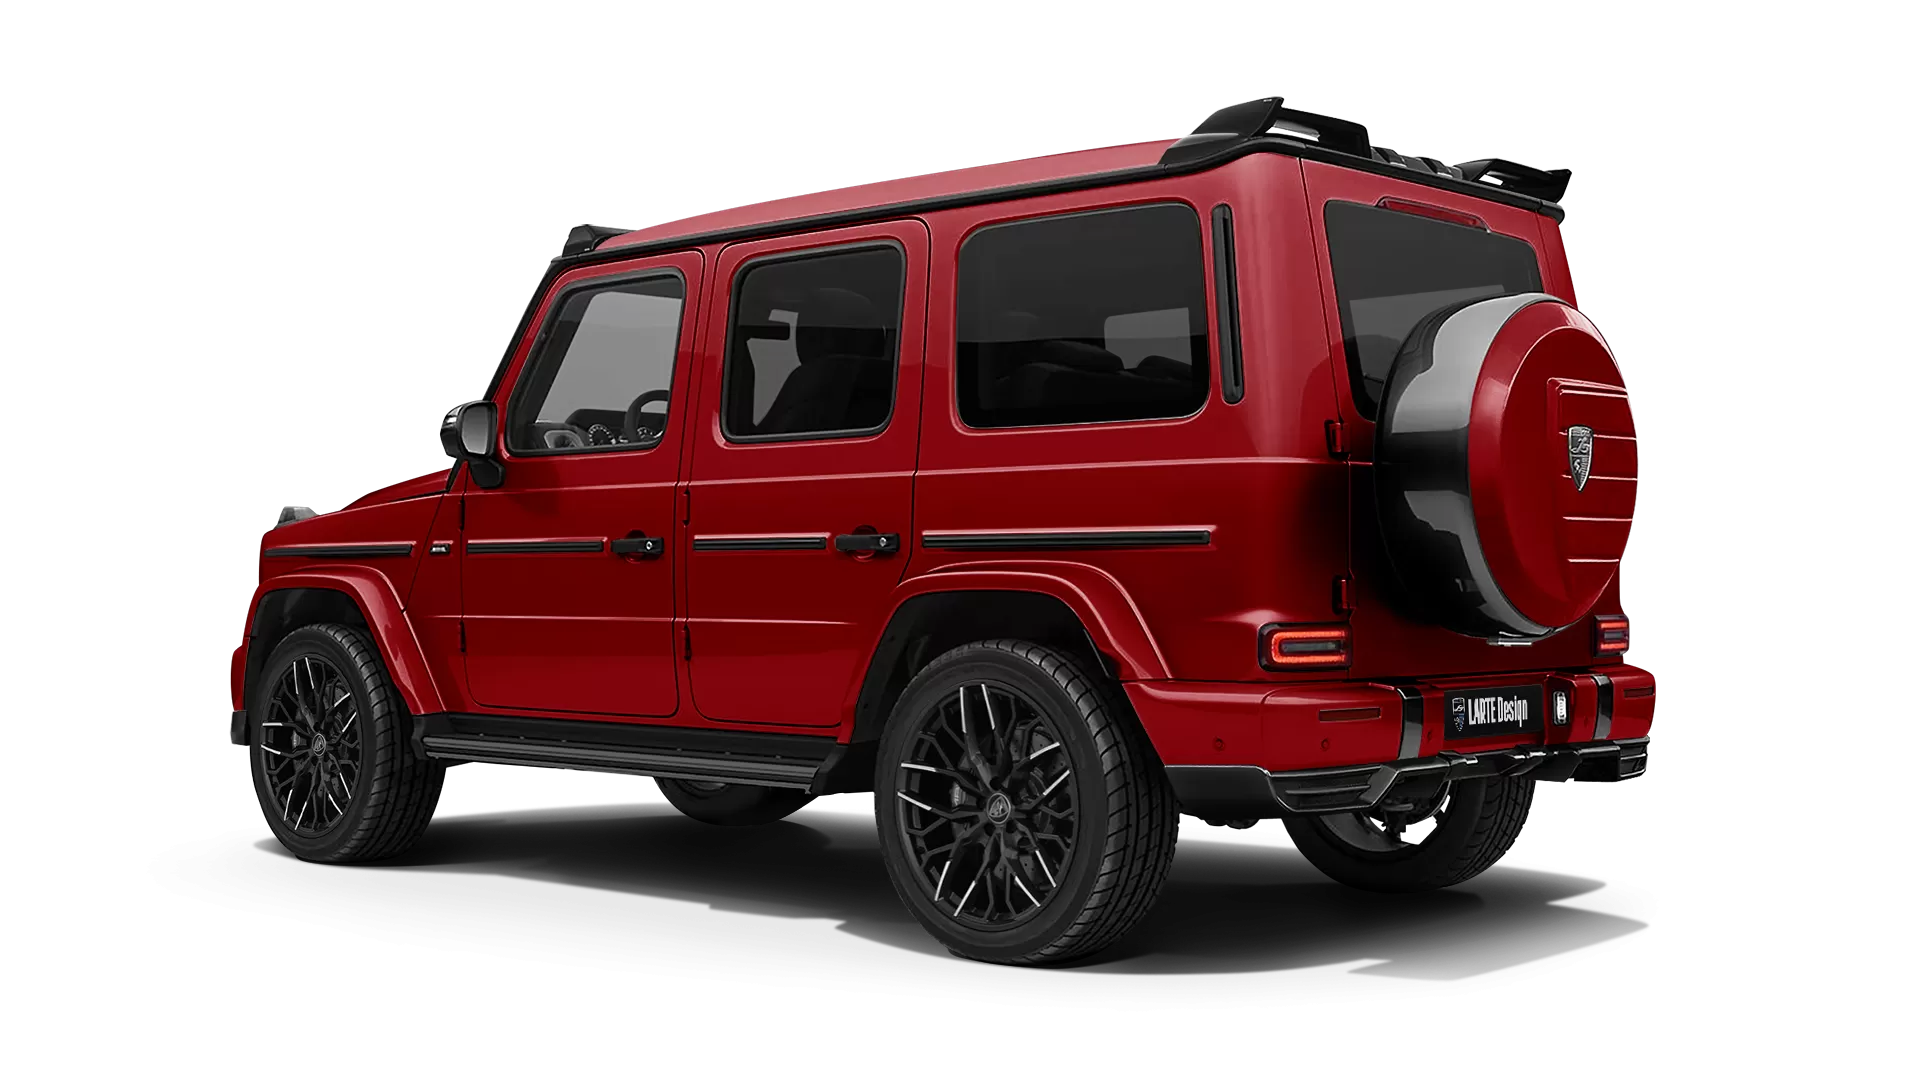 Mercedes G class W463 with painted body kit: rear view shown in Jupiter Red